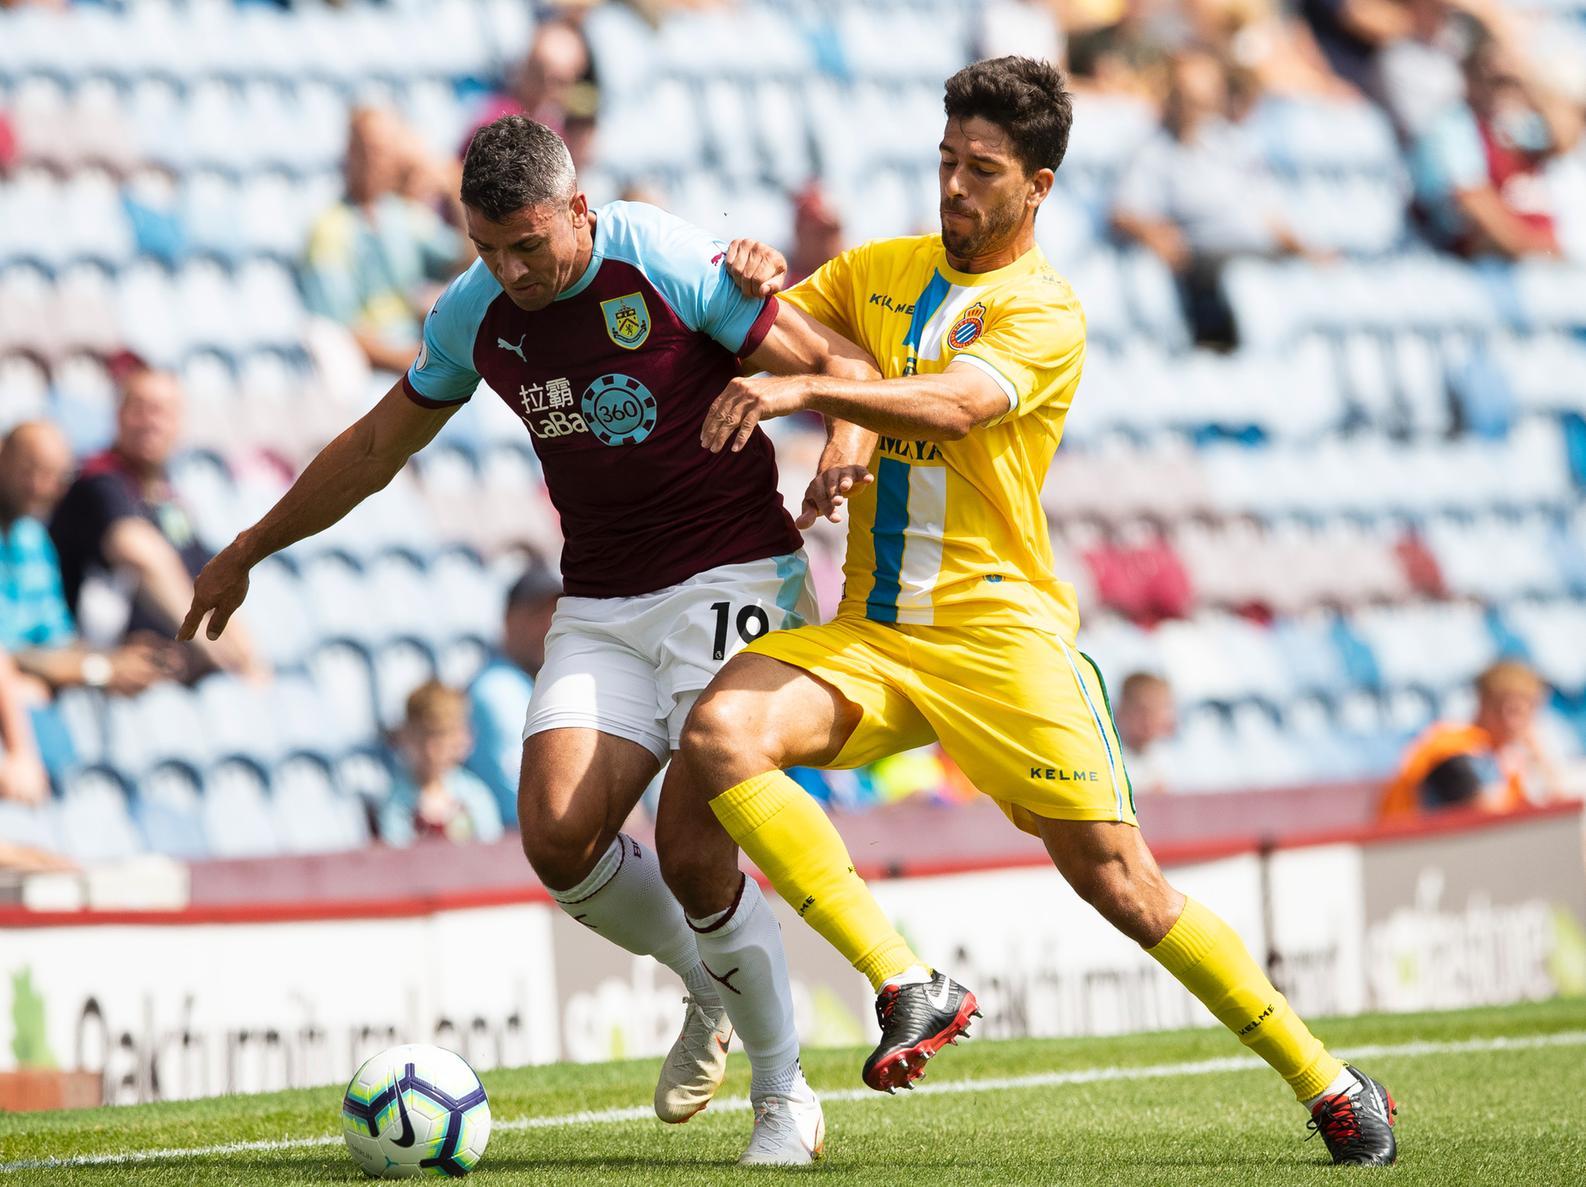 The former Republic of Ireland international endured a frustrating time with the Clarets. The forward suffered an ankle injury on his first start for the club, a 2-0 win over Blackburn Rovers in the League Cup, and played just one more time.